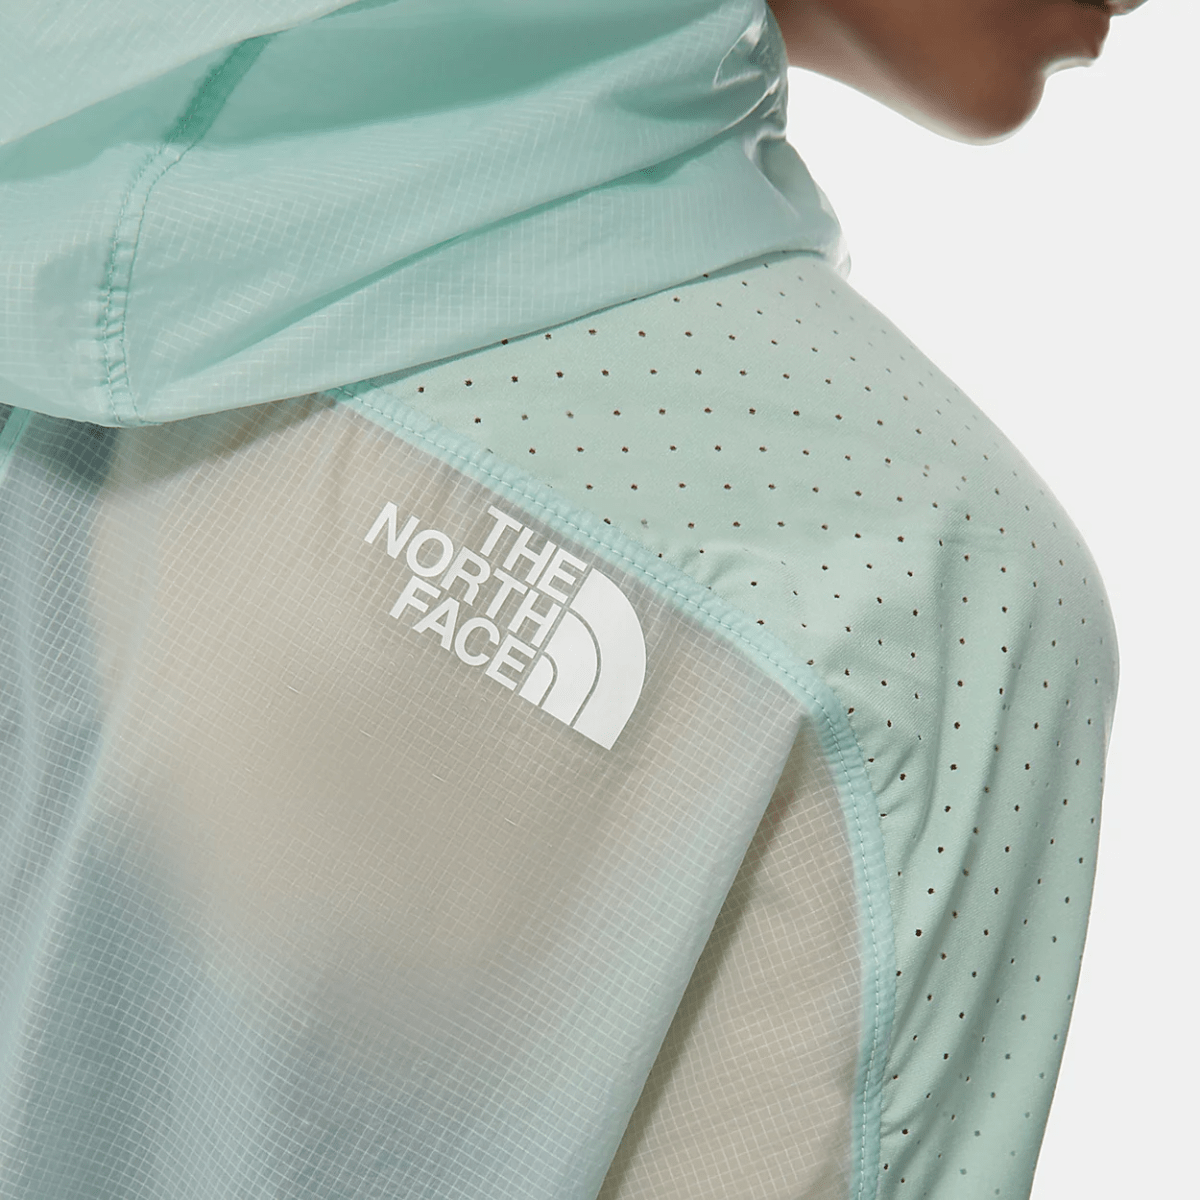 The North Face womens Glacier wind top Fast and Light